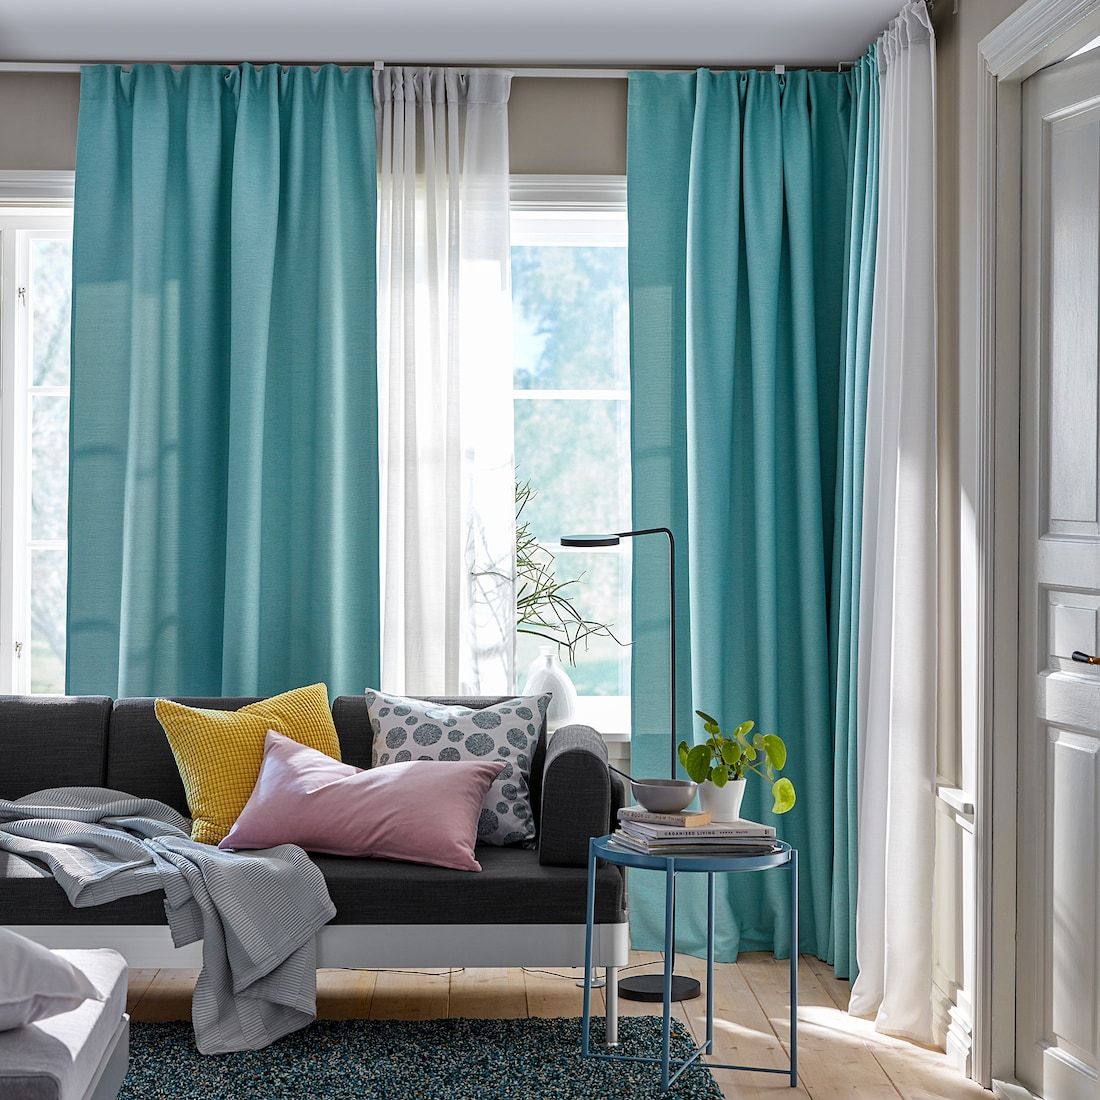 Turquoise curtains are the best